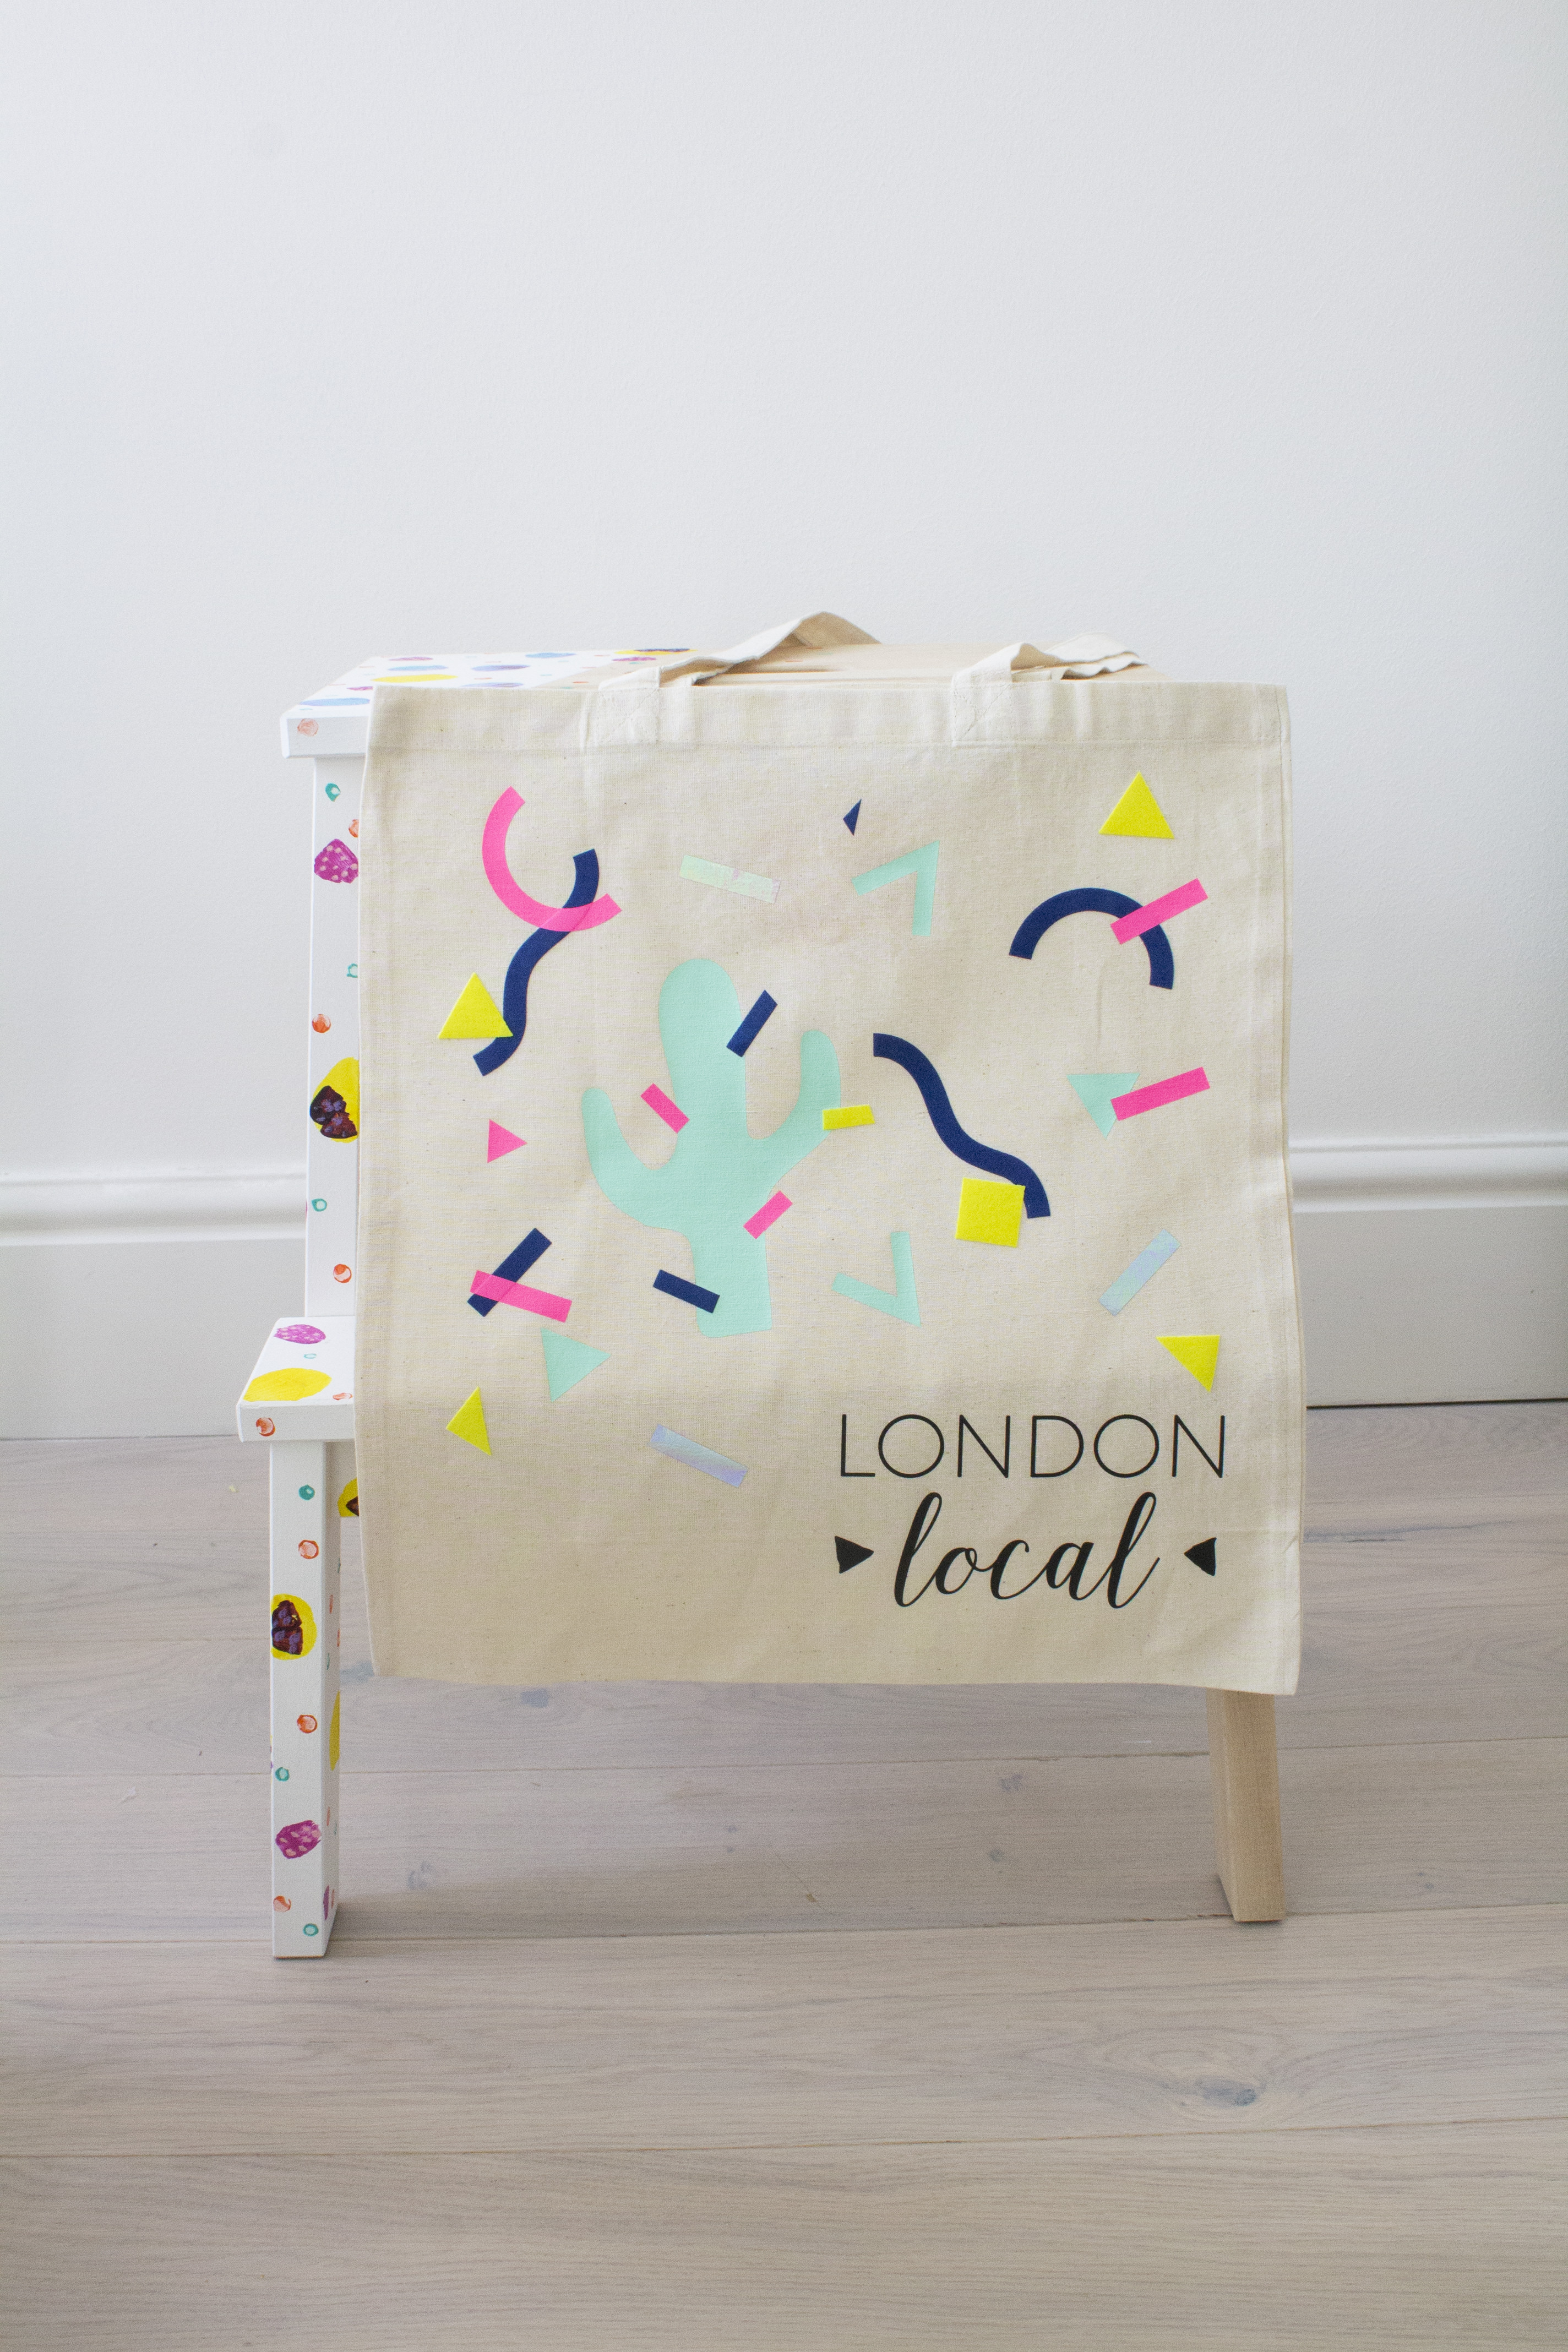 London-local-tote-bag-collaboration-Little-Big-Bell